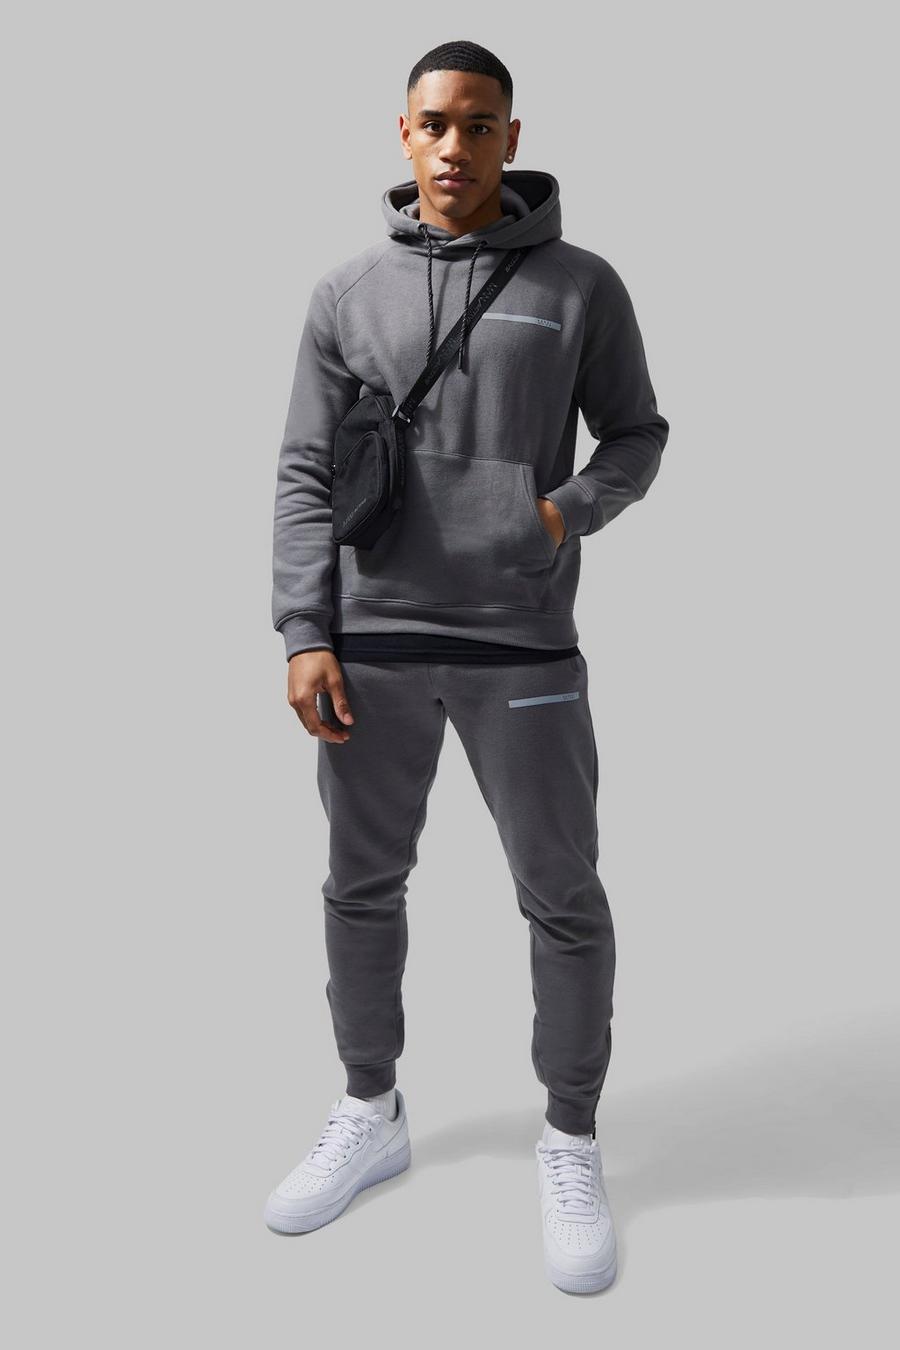 Charcoal grey Man Active Gym Training Hoodie Tracksuit